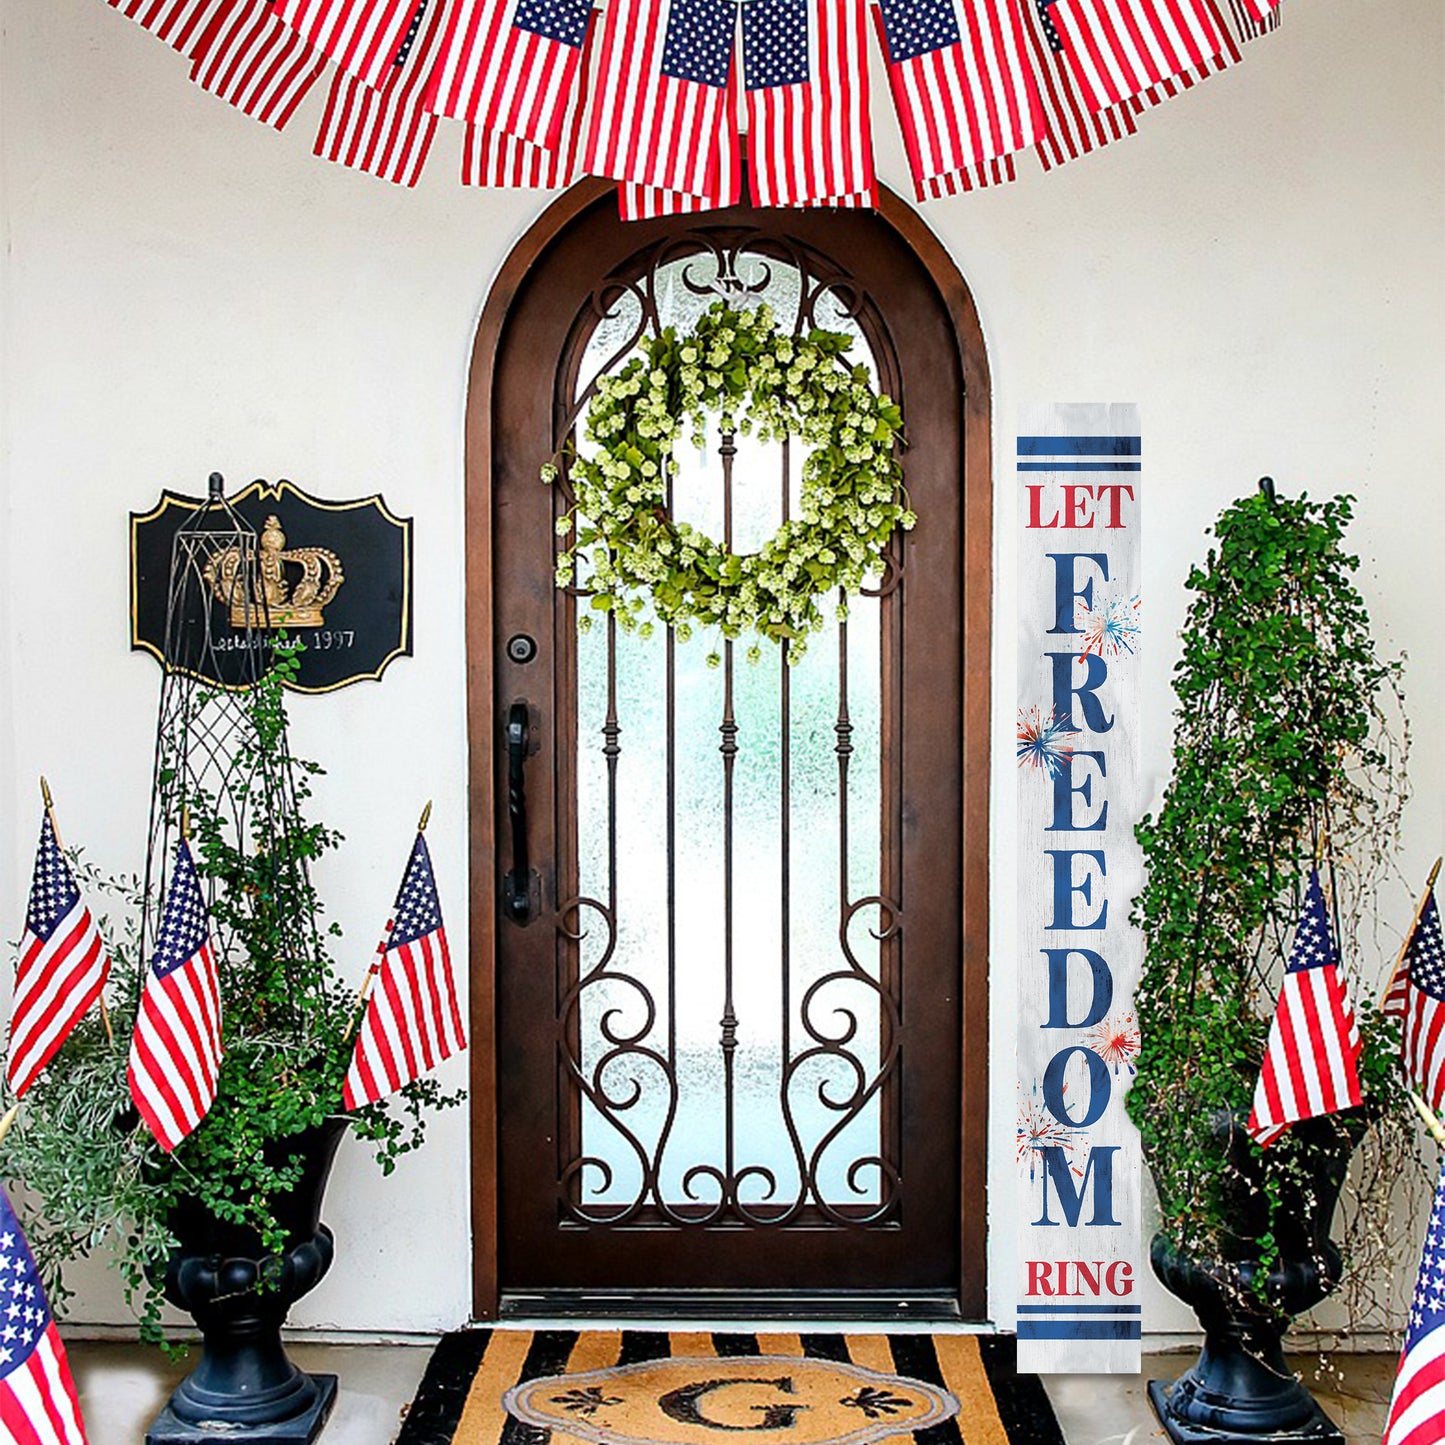 72in Let Freedom Ring Porch Sign | Patriotic Wooden Porch Decor | 4th of July Decor for Front Door | Independence Day Outdoor Decor